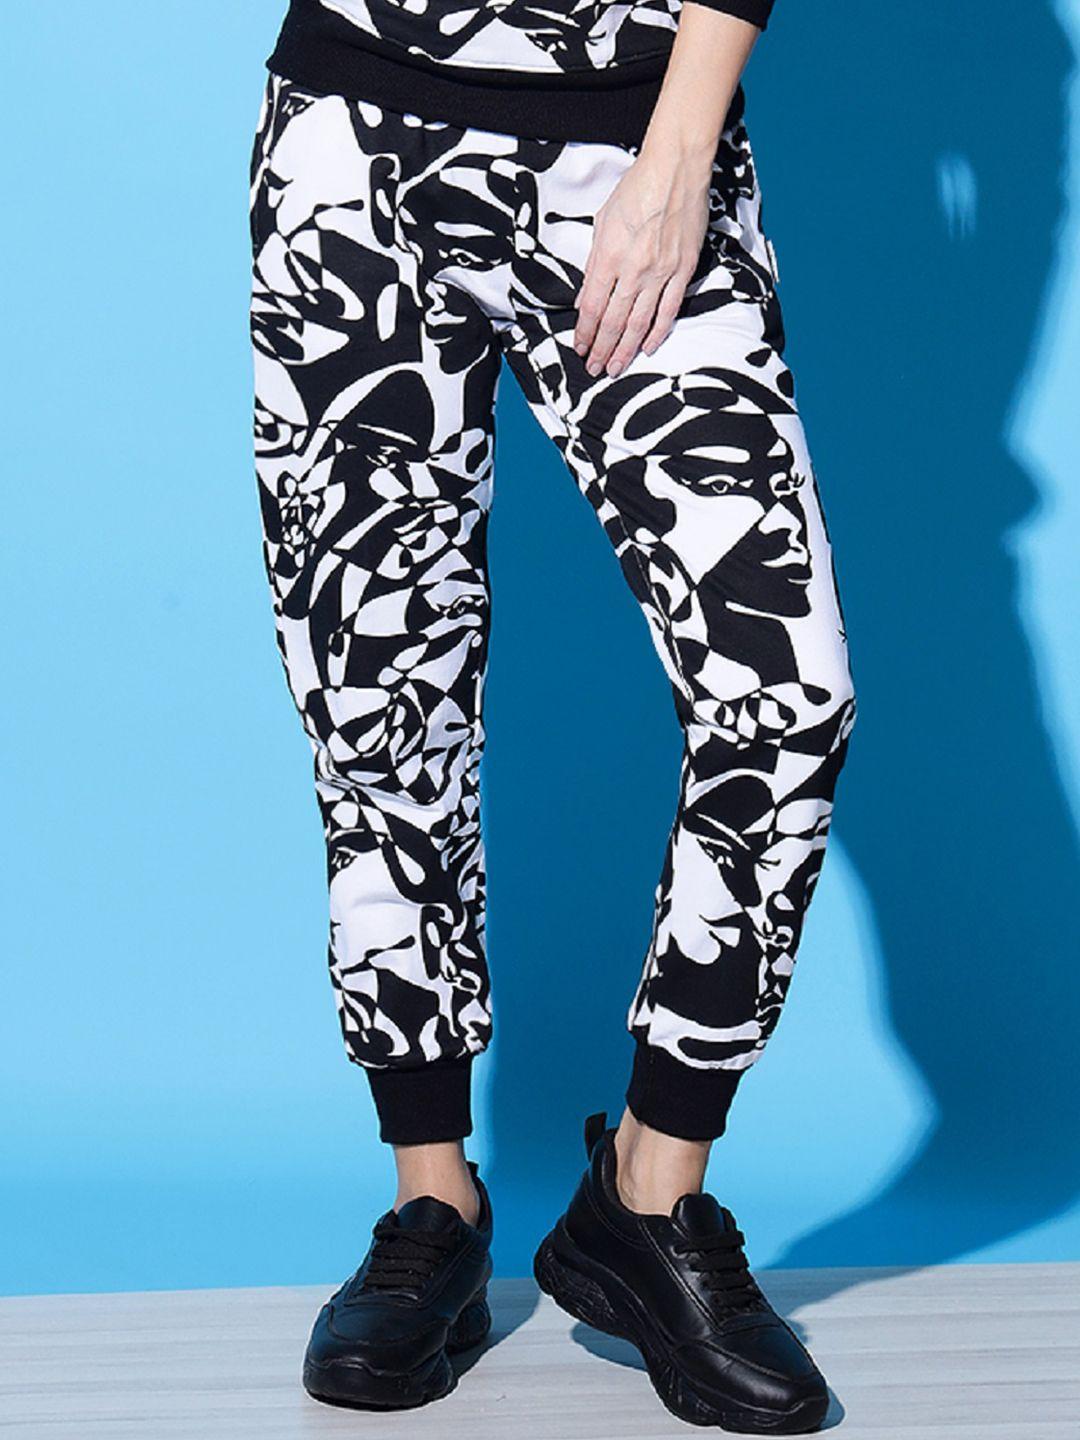 the-dry-state-women-black-&-white-cotton-printed-jogger